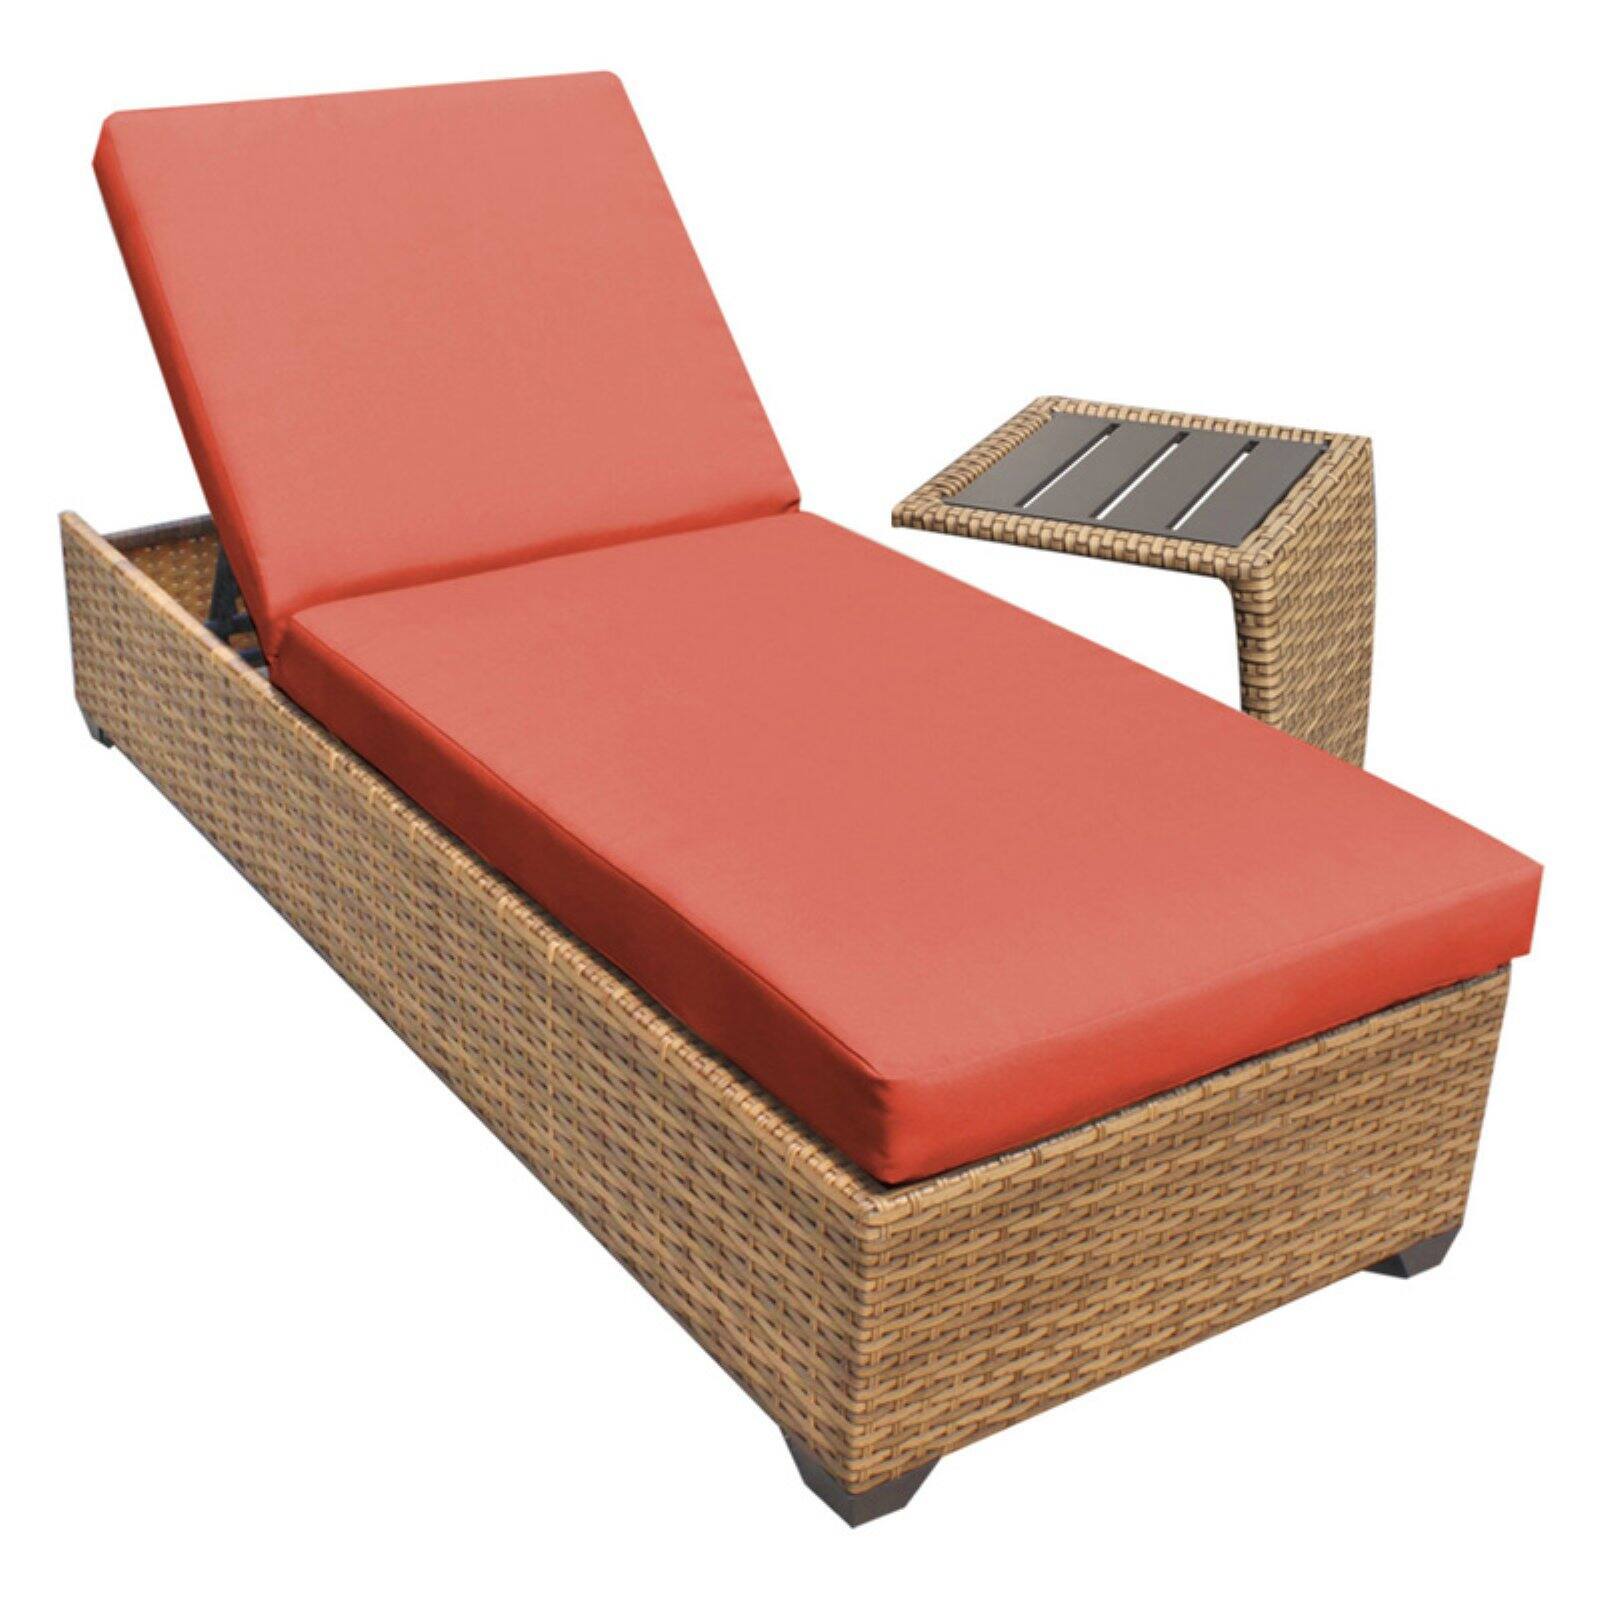 TK Classics Laguna Outdoor Chaise Lounge with Side Table - Set of 2 Cushion Covers - image 1 of 2